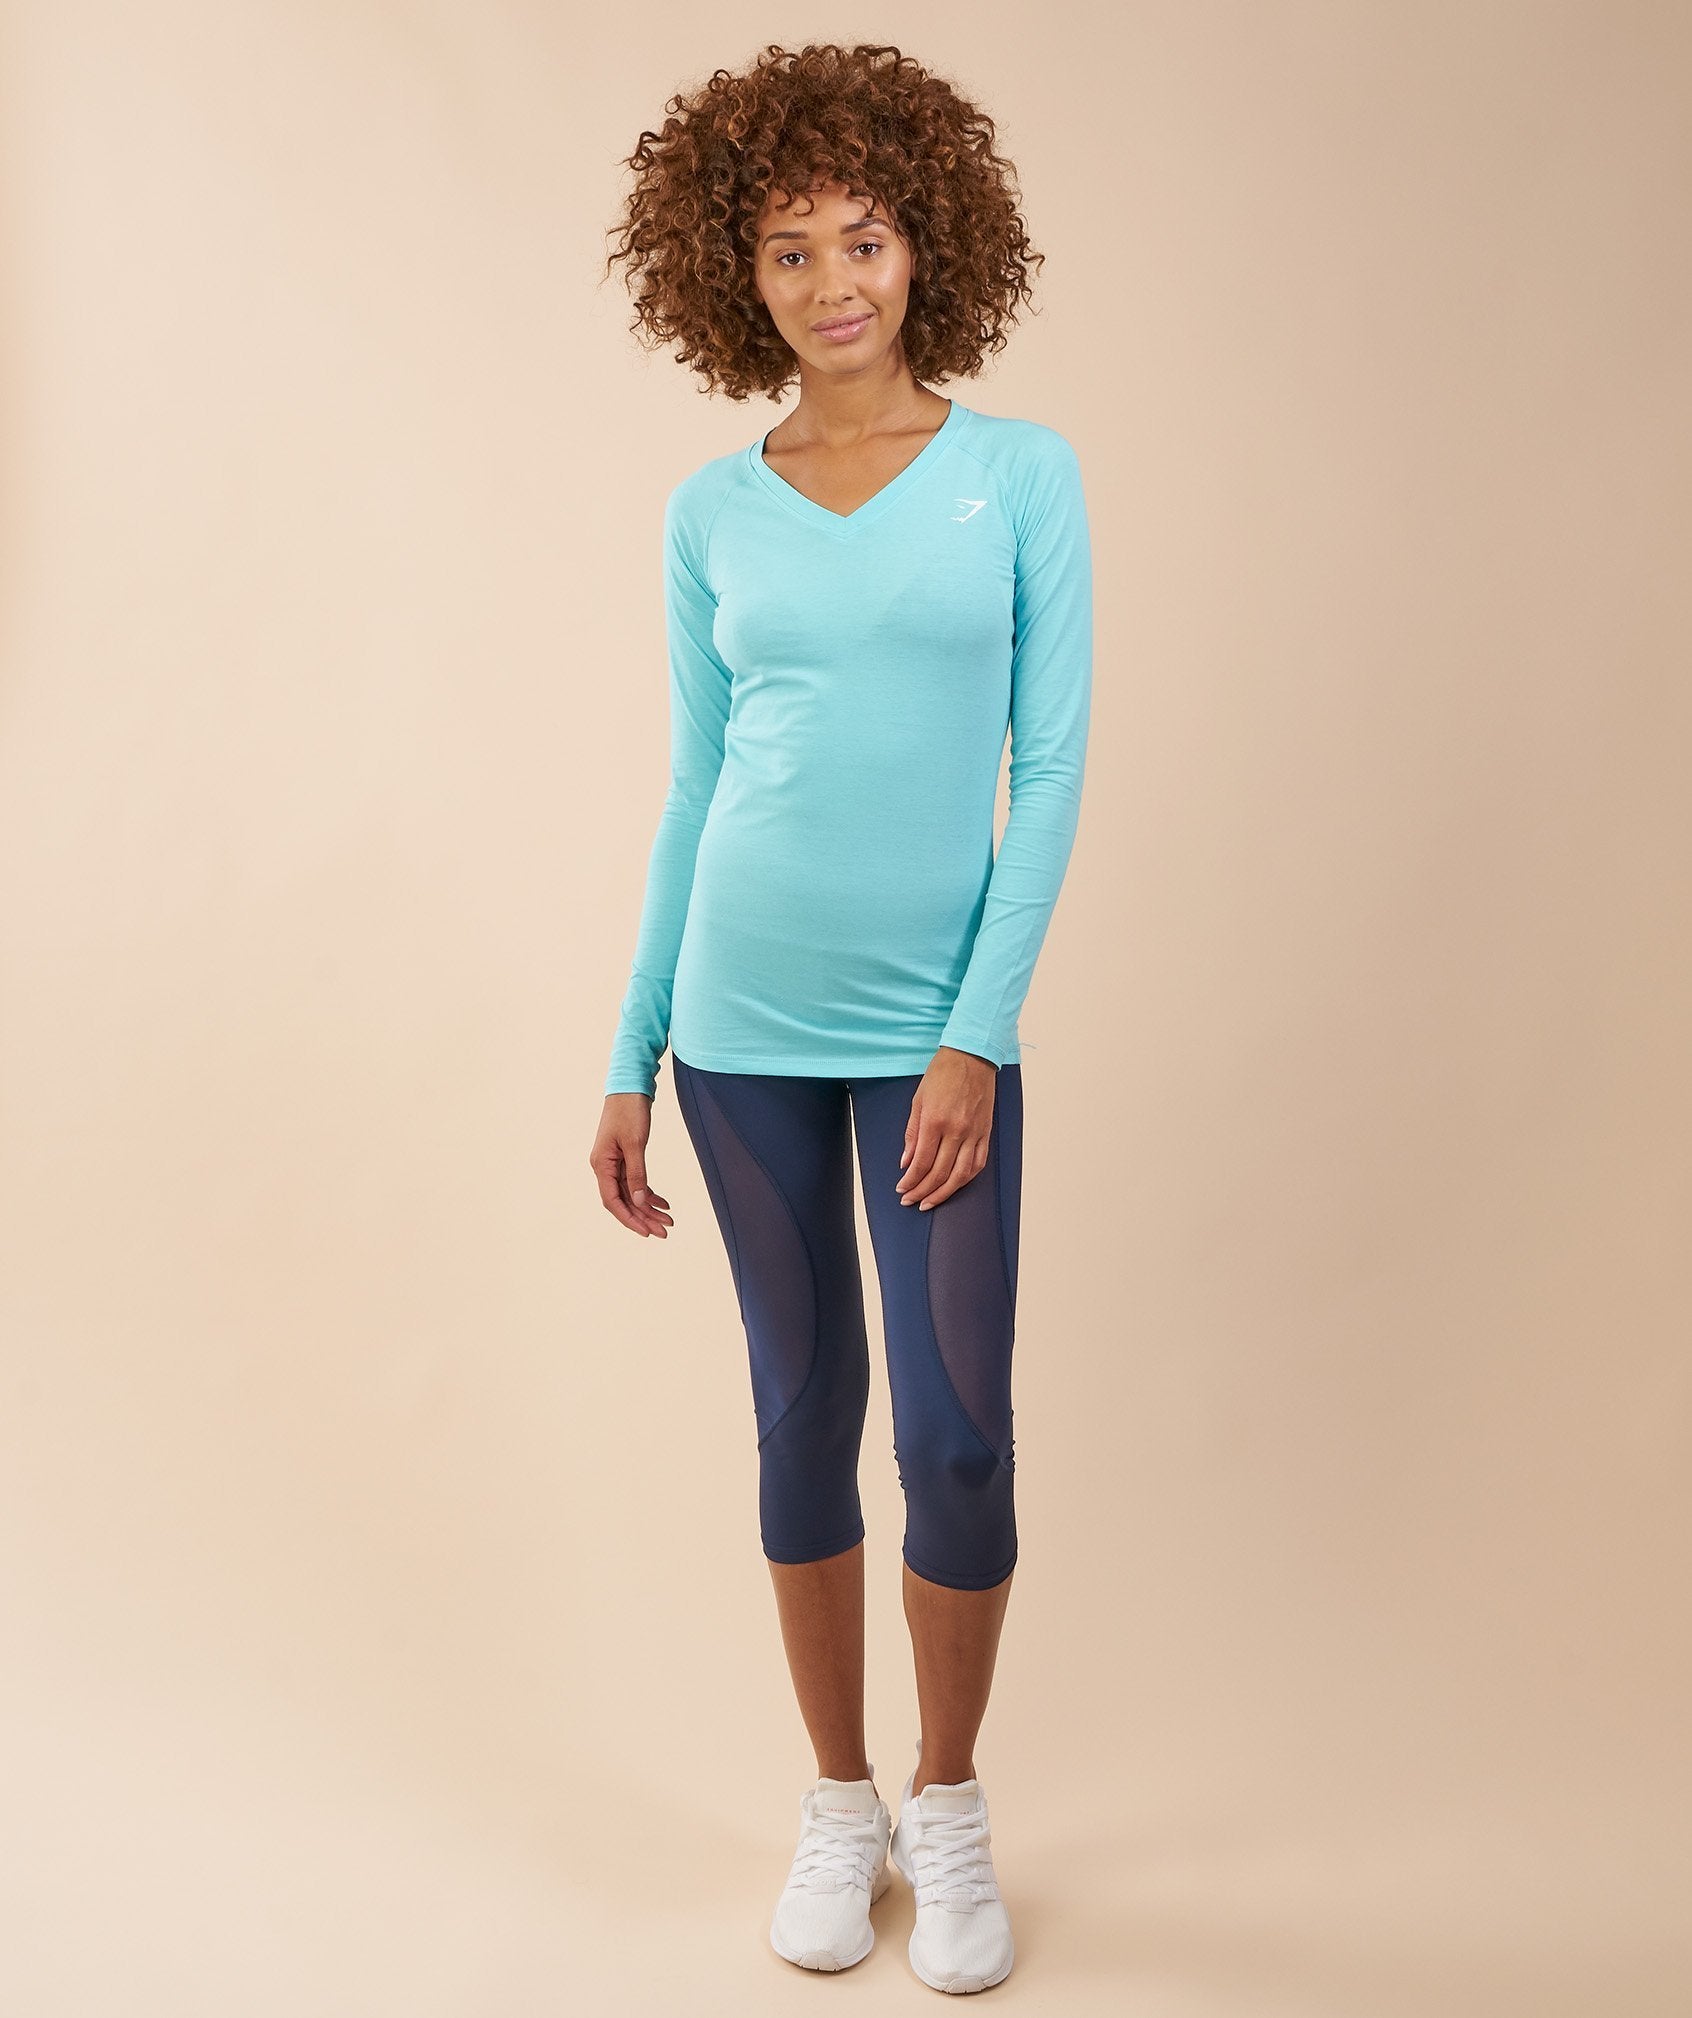 Verve Long Sleeve T-Shirt in Marine Blue - view 4